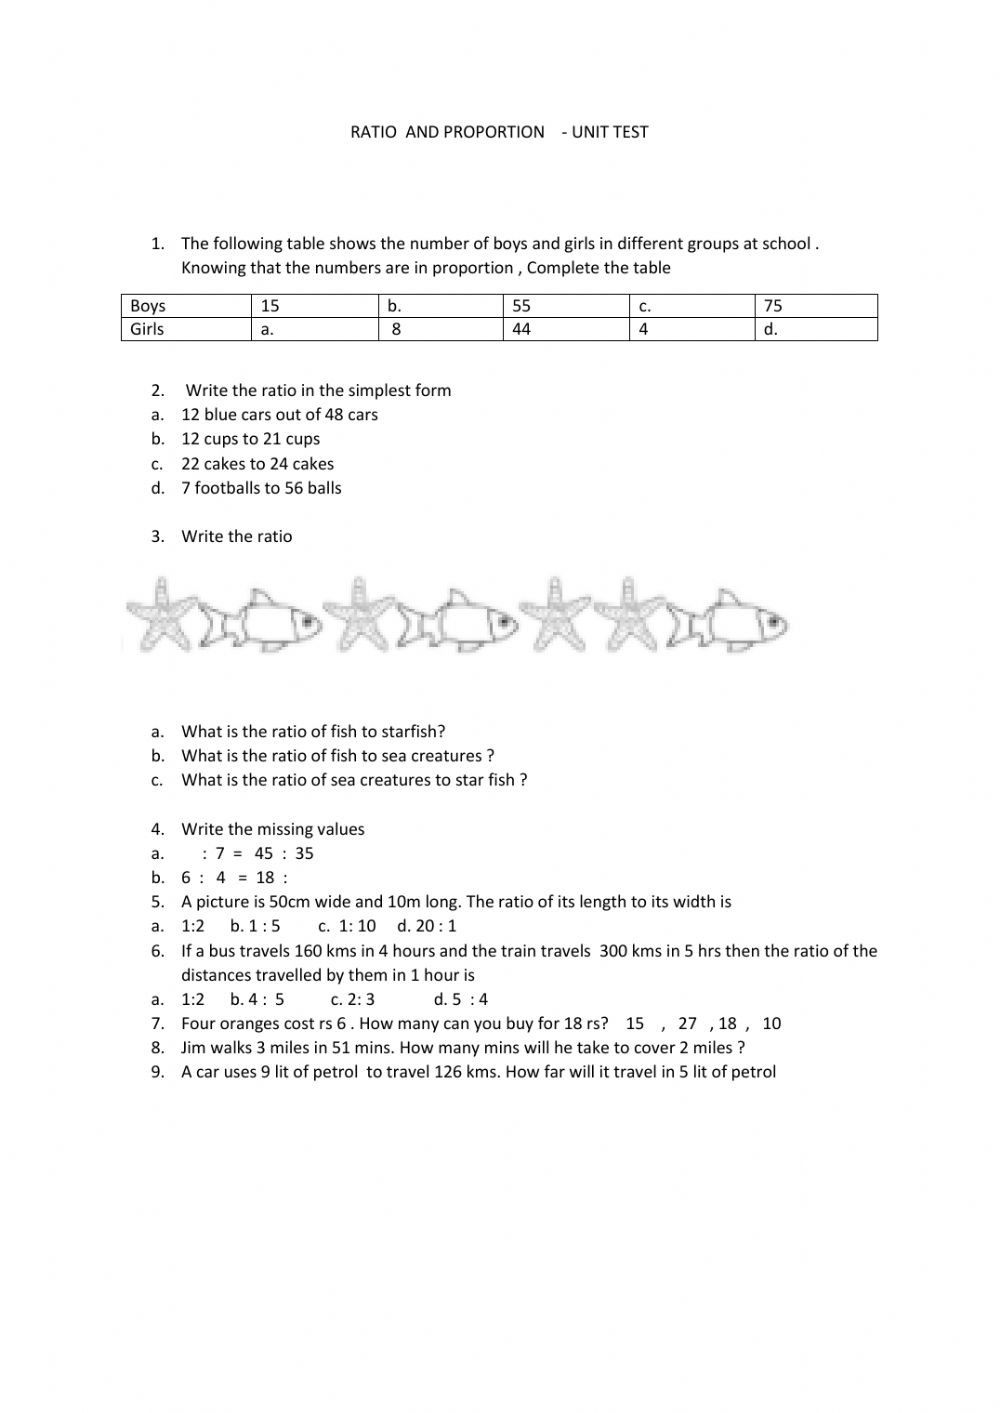 Ratio and Proportion Worksheet Pdf Ratio and Proportion Interactive Worksheet